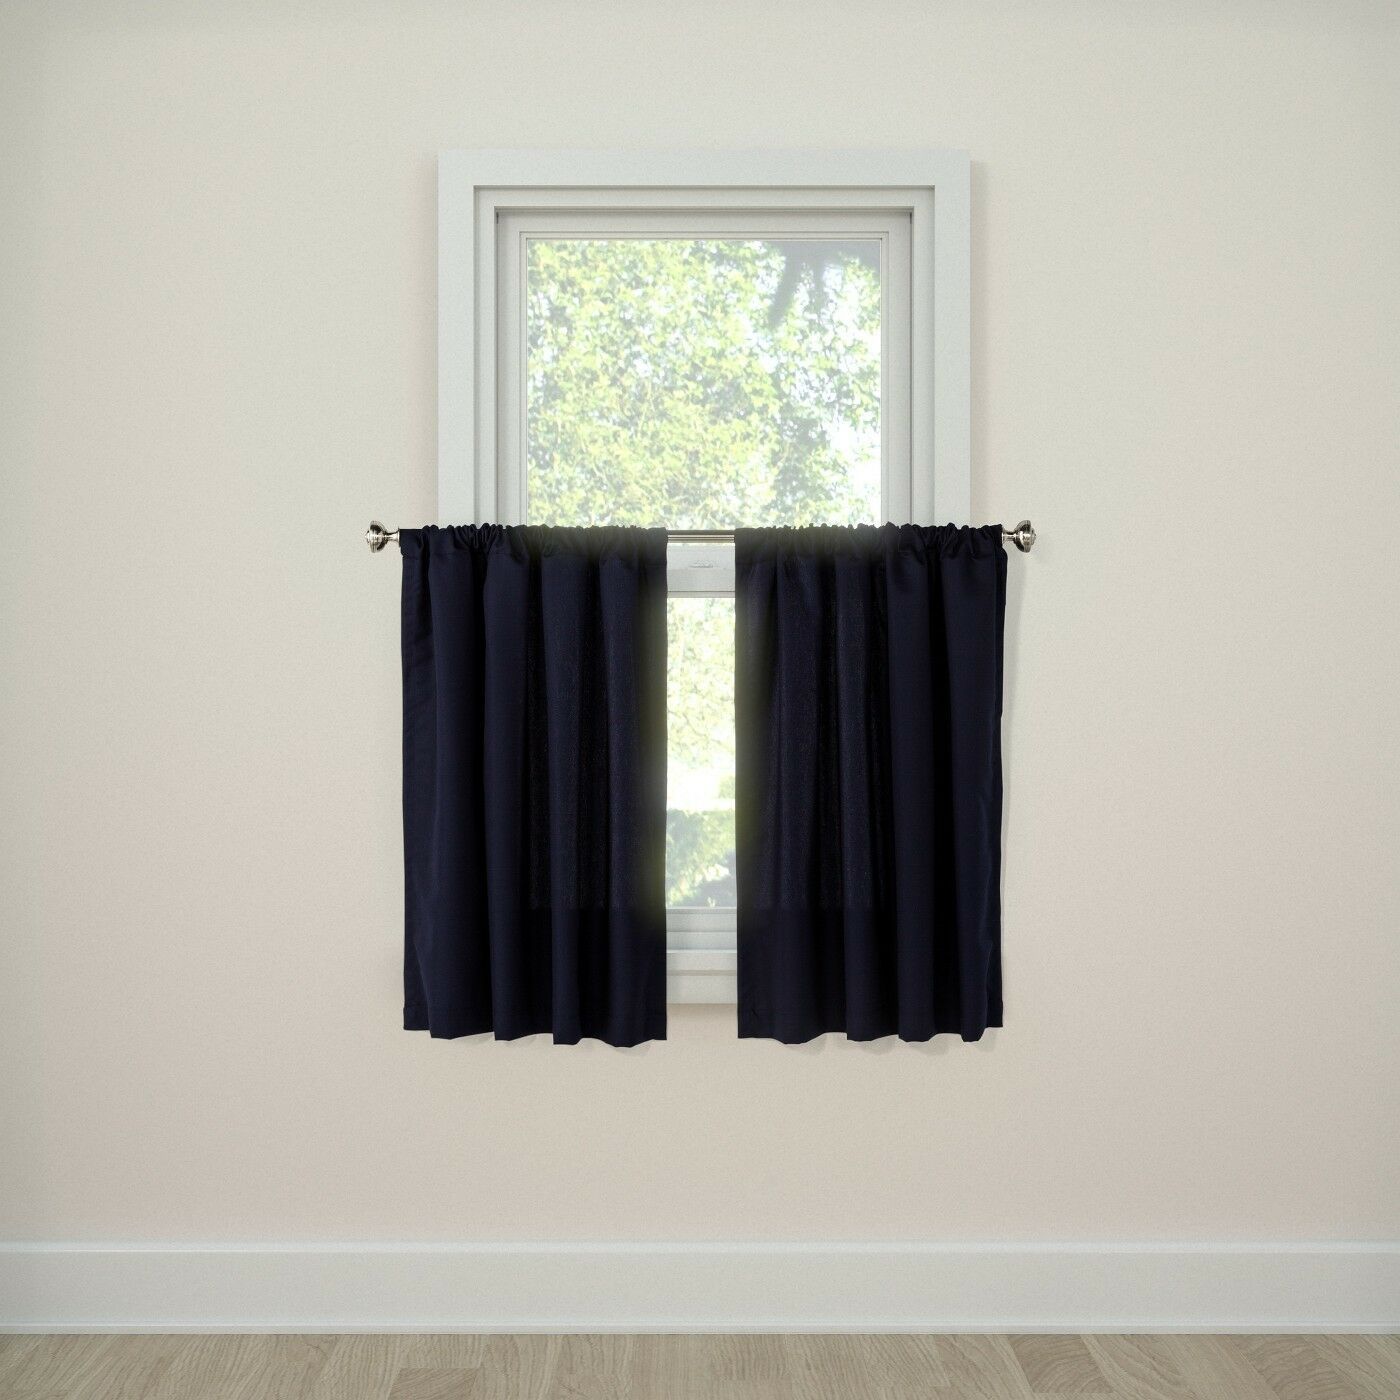 Details About New Twill Café Curtain Tiers (36"x42") – Room Essentials Navy  Blue Intended For Twill 3 Piece Kitchen Curtain Tier Sets (View 13 of 20)